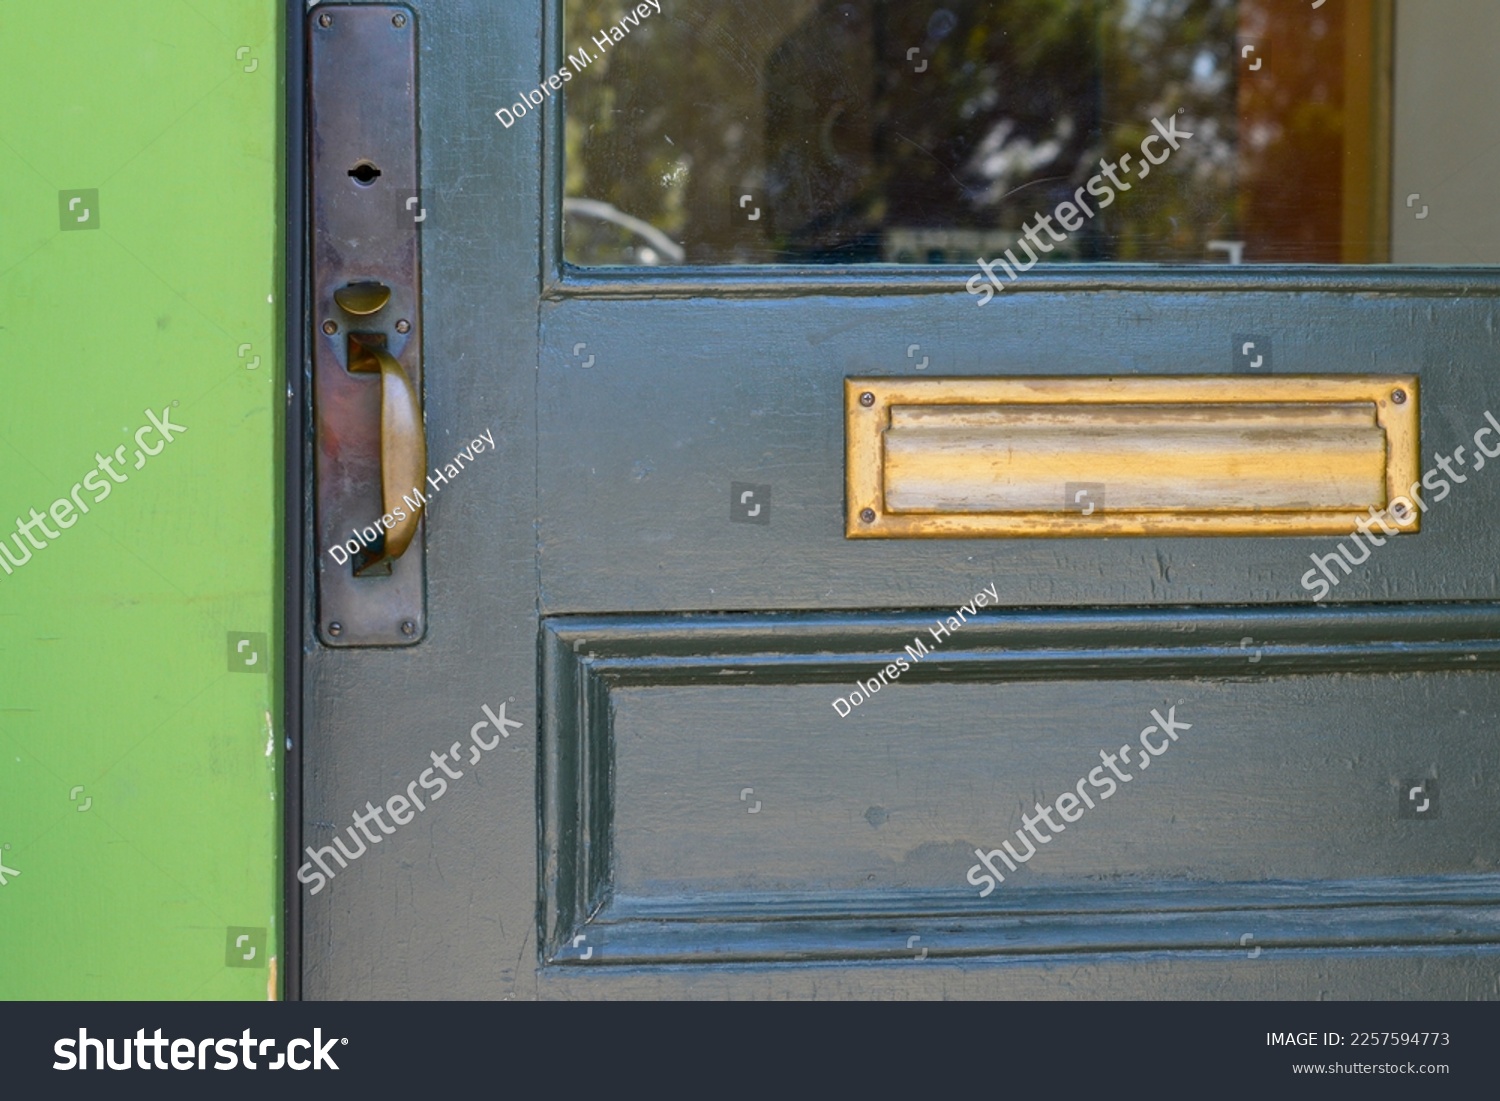 A dark green wooden door with half glass pane window, and a wooden panel. The vintage door has a brass door handle, a keyhole, and a letter plate. The trim of the building is vibrant green color.  #2257594773